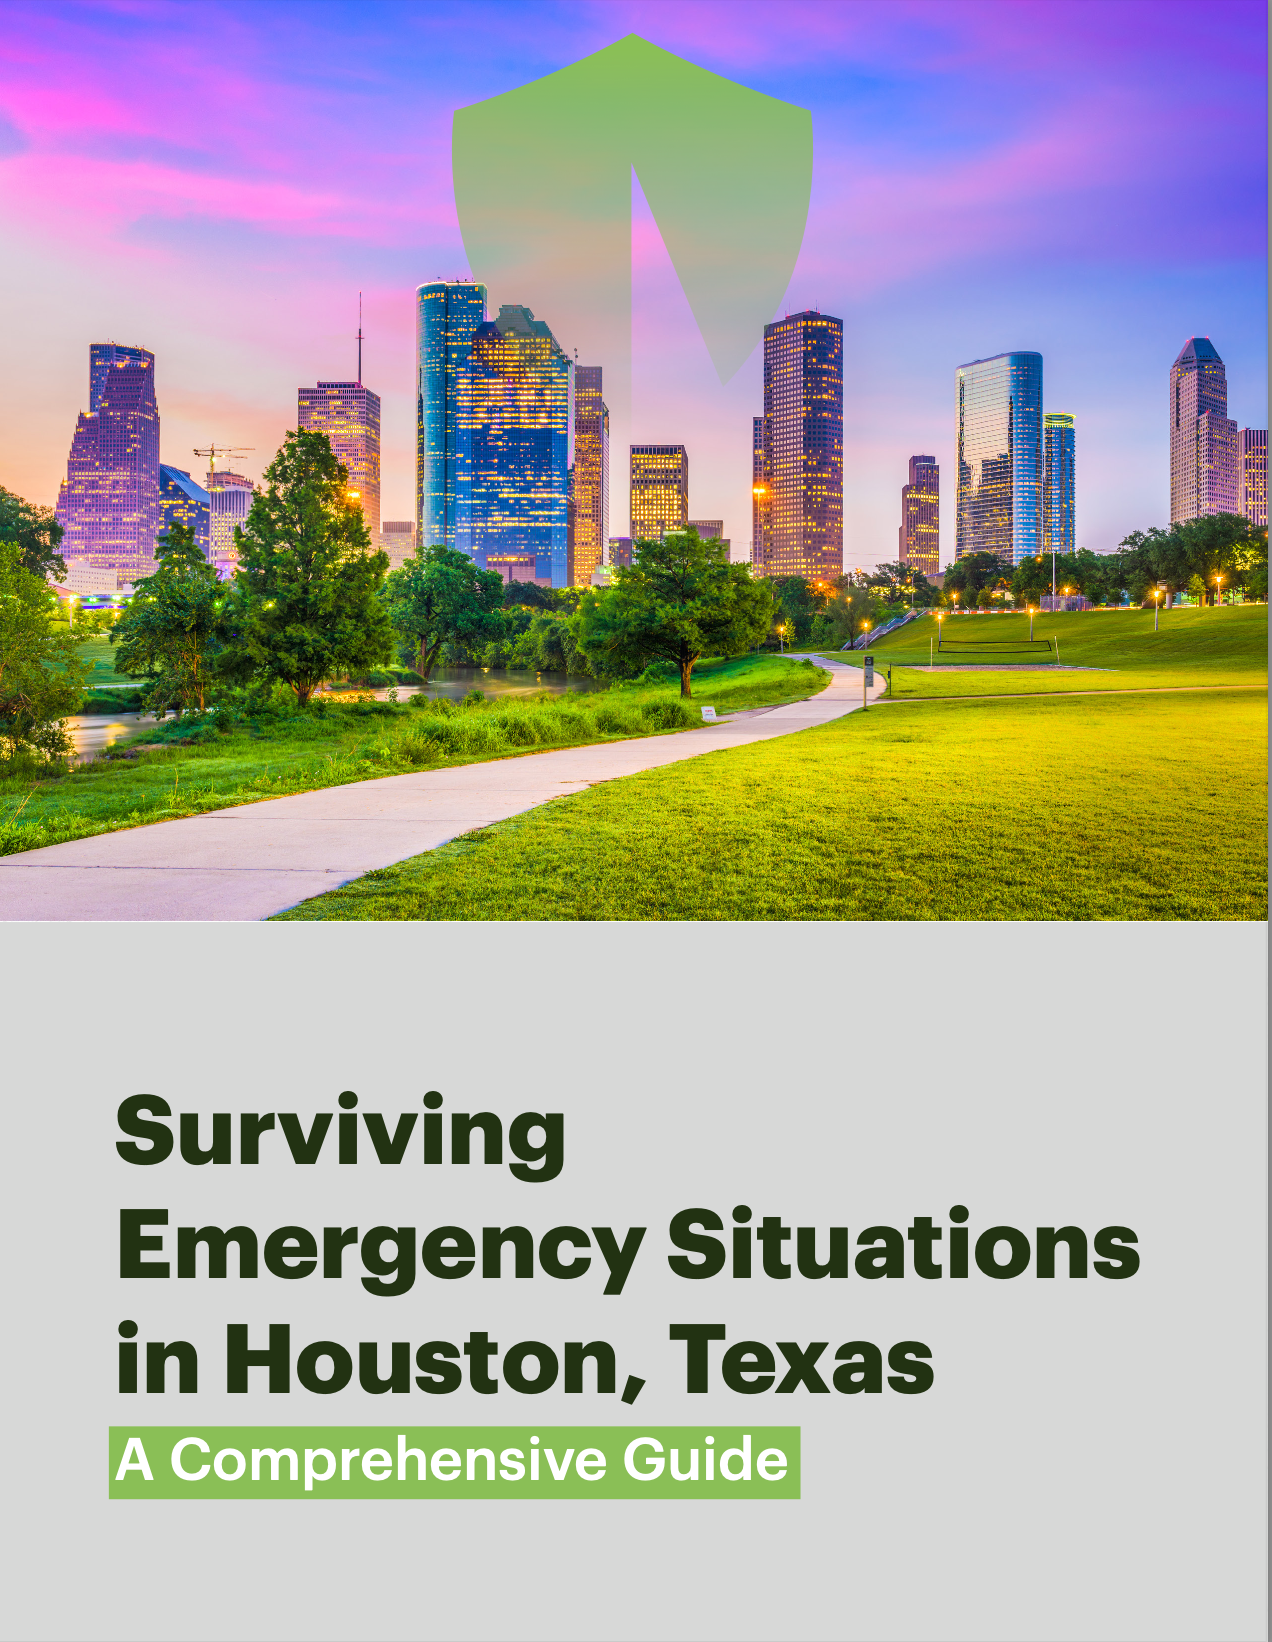 Houston emergency situations guidelines ebook